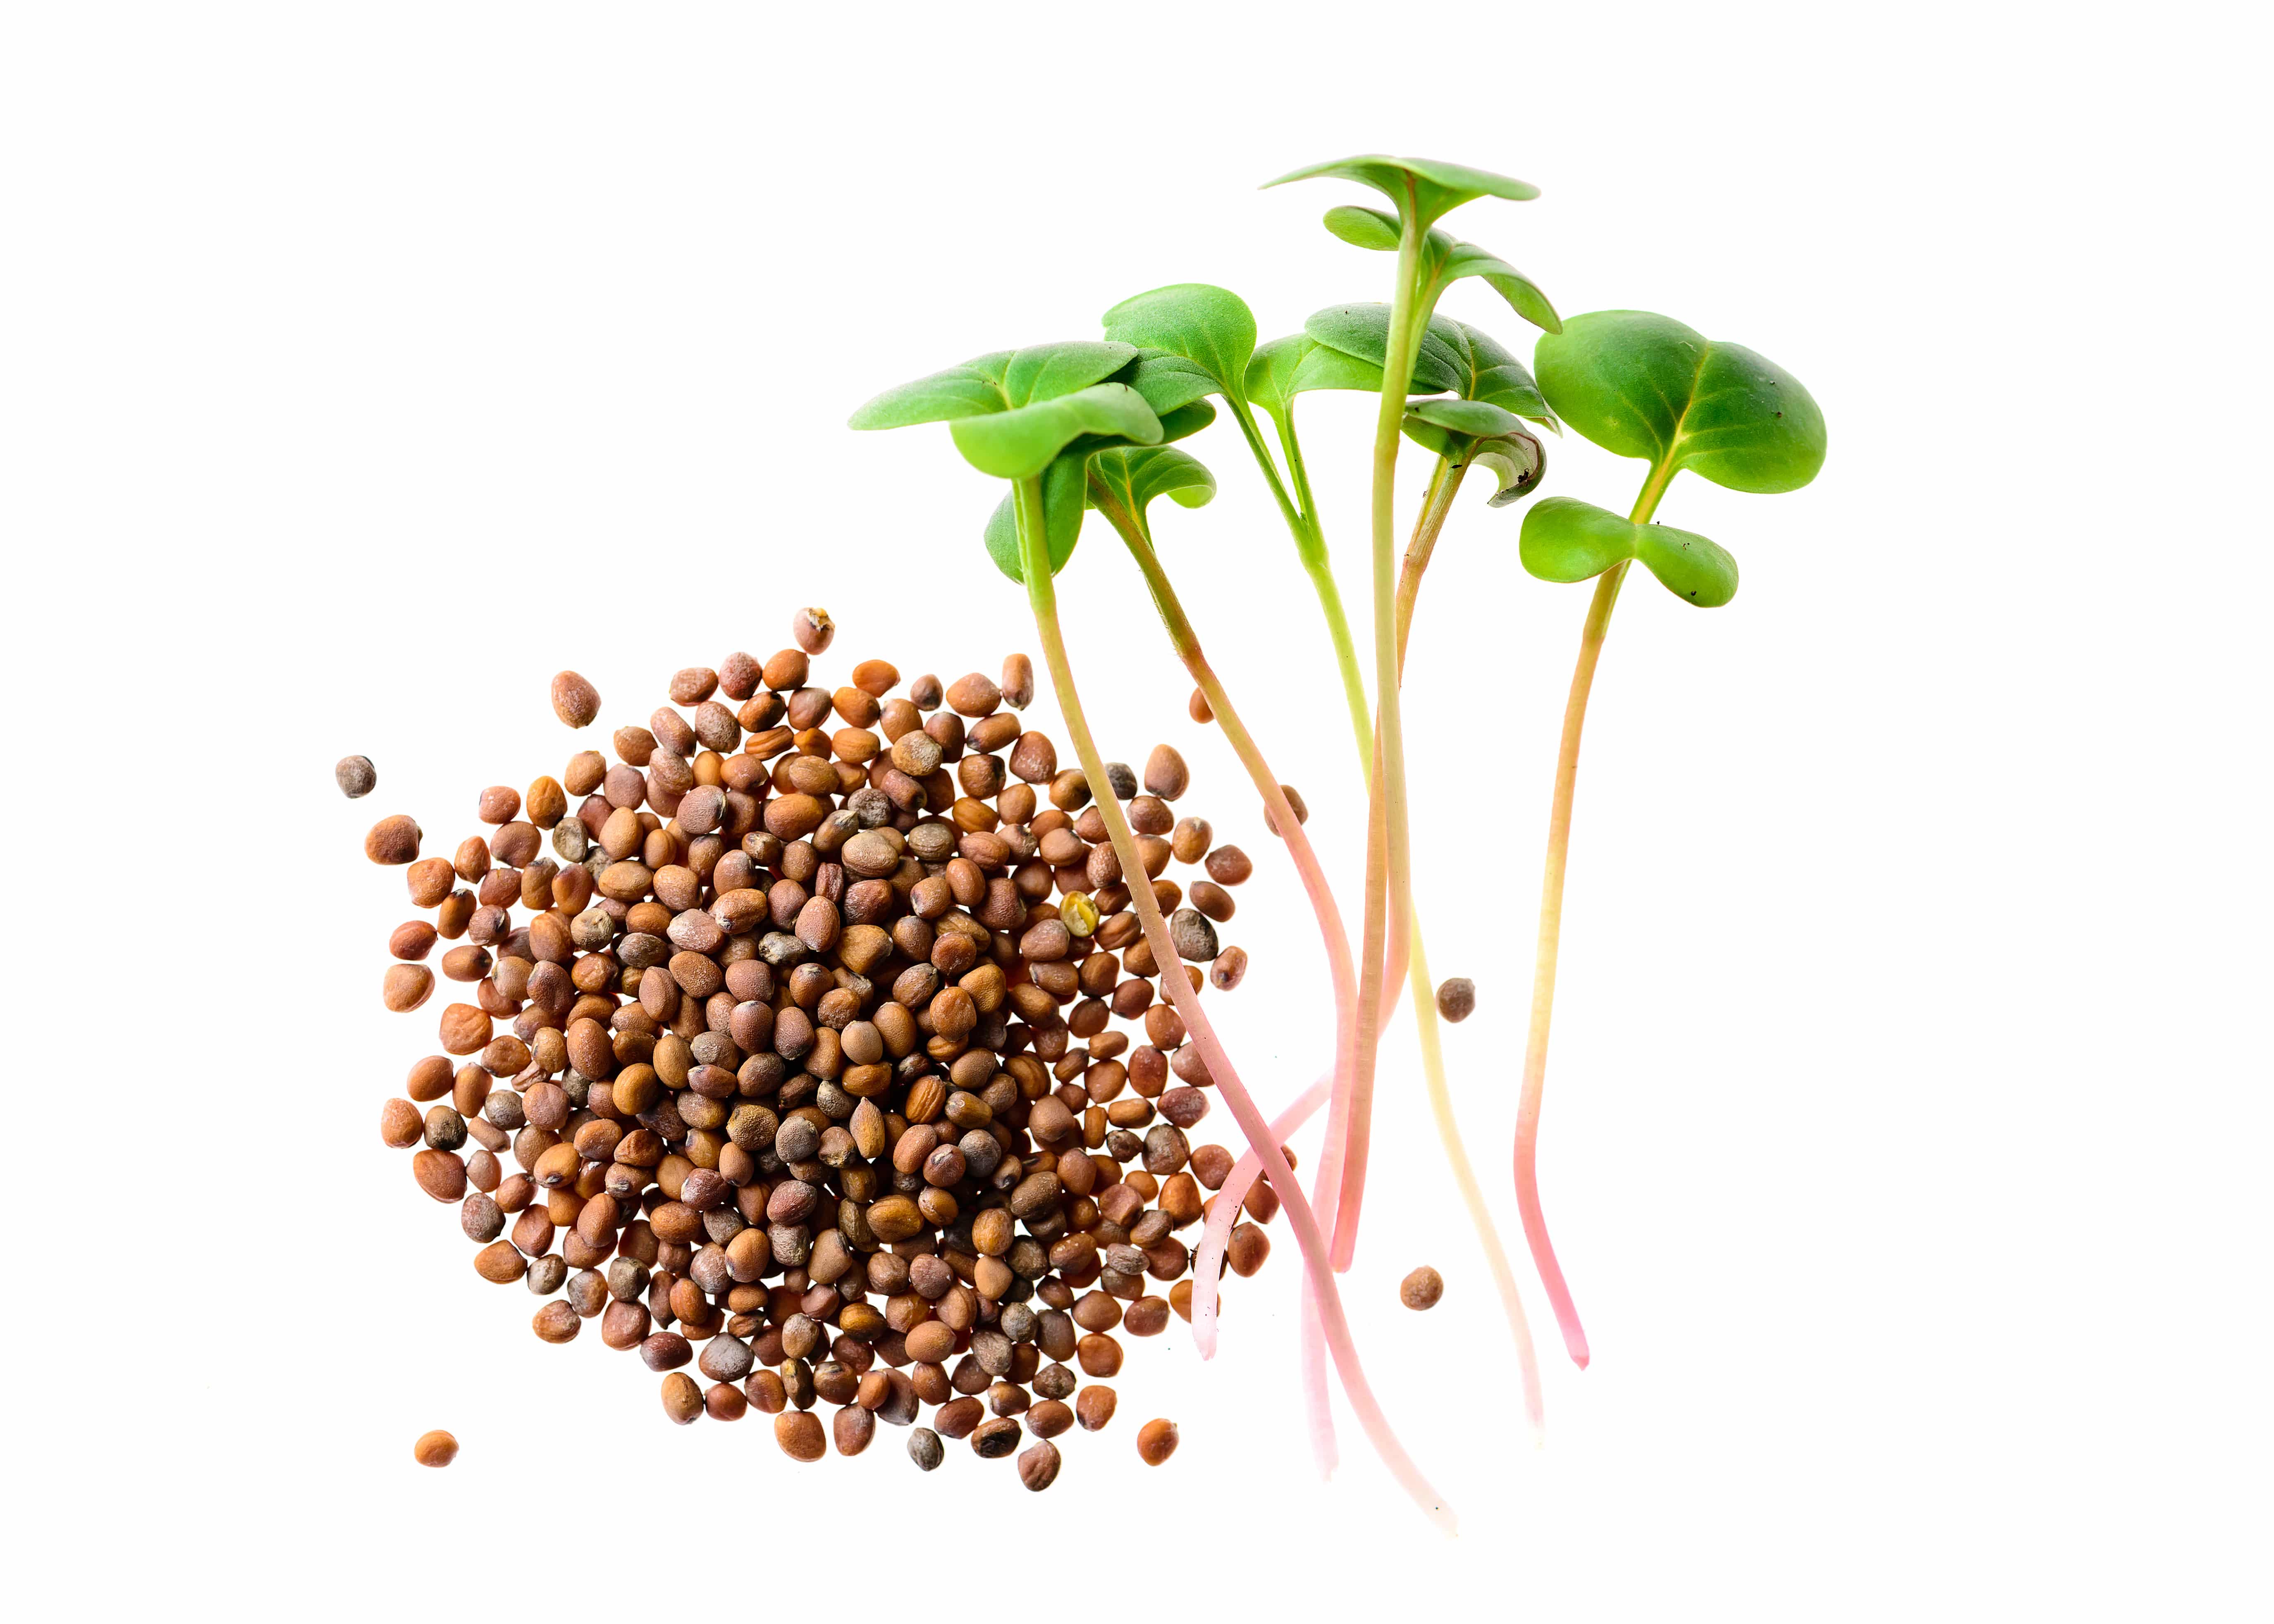 microgreen radish grain and germinated sprout isolated on a white background